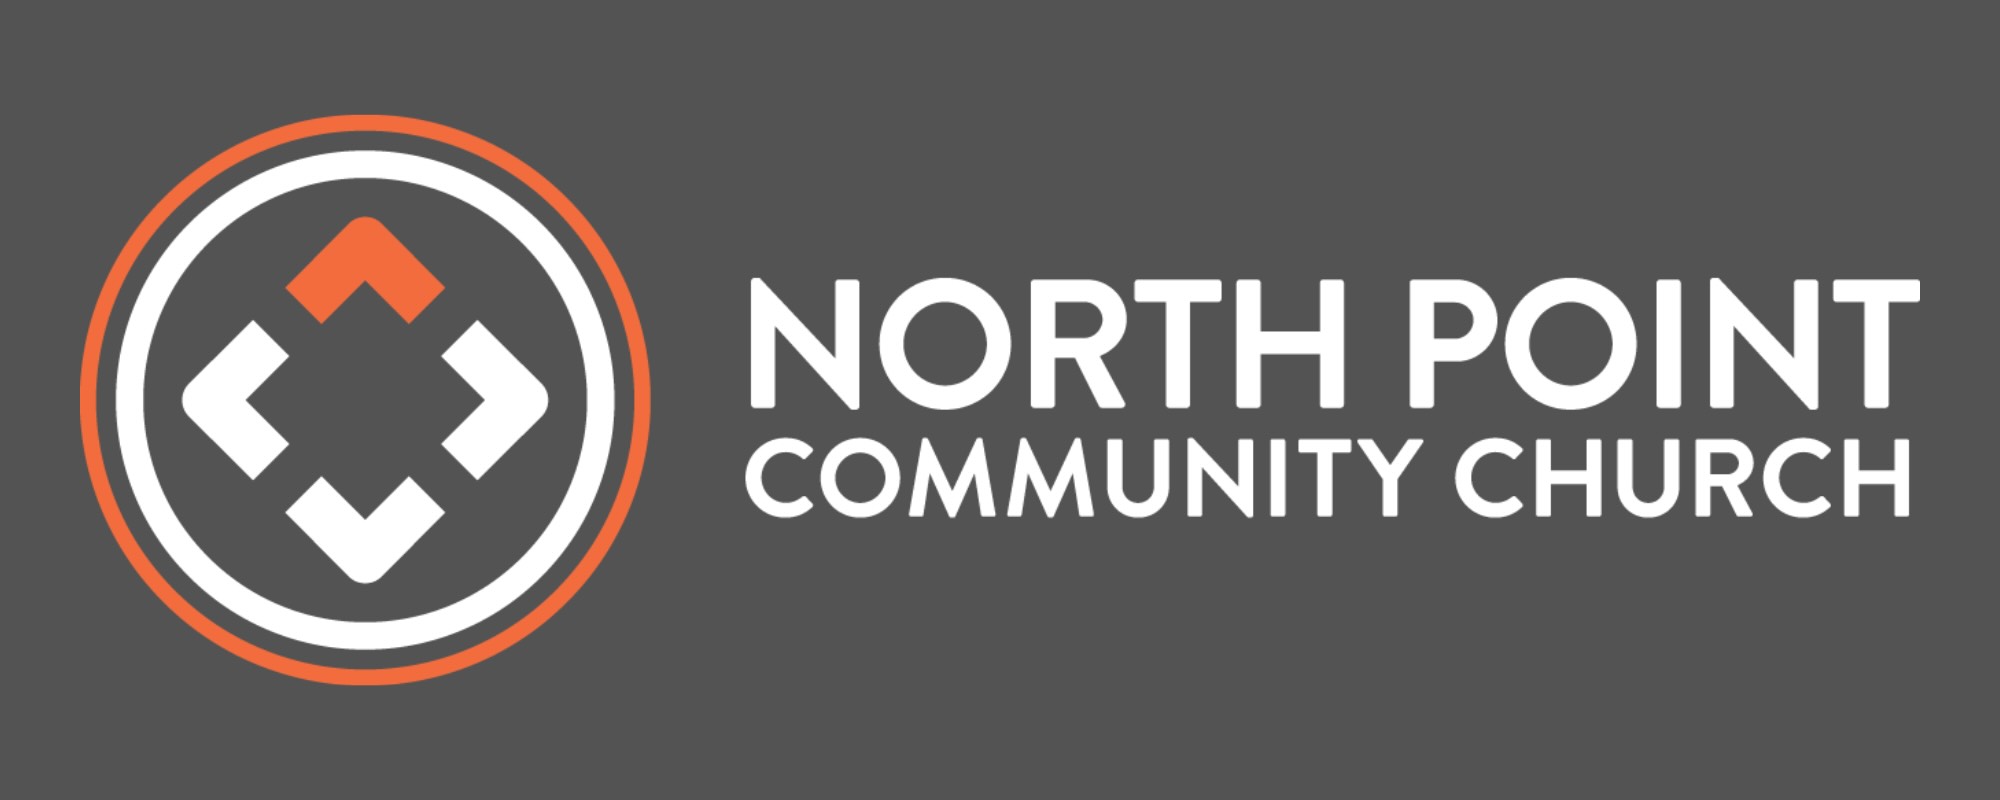 The Church Logo Design of Northpoint Community Church